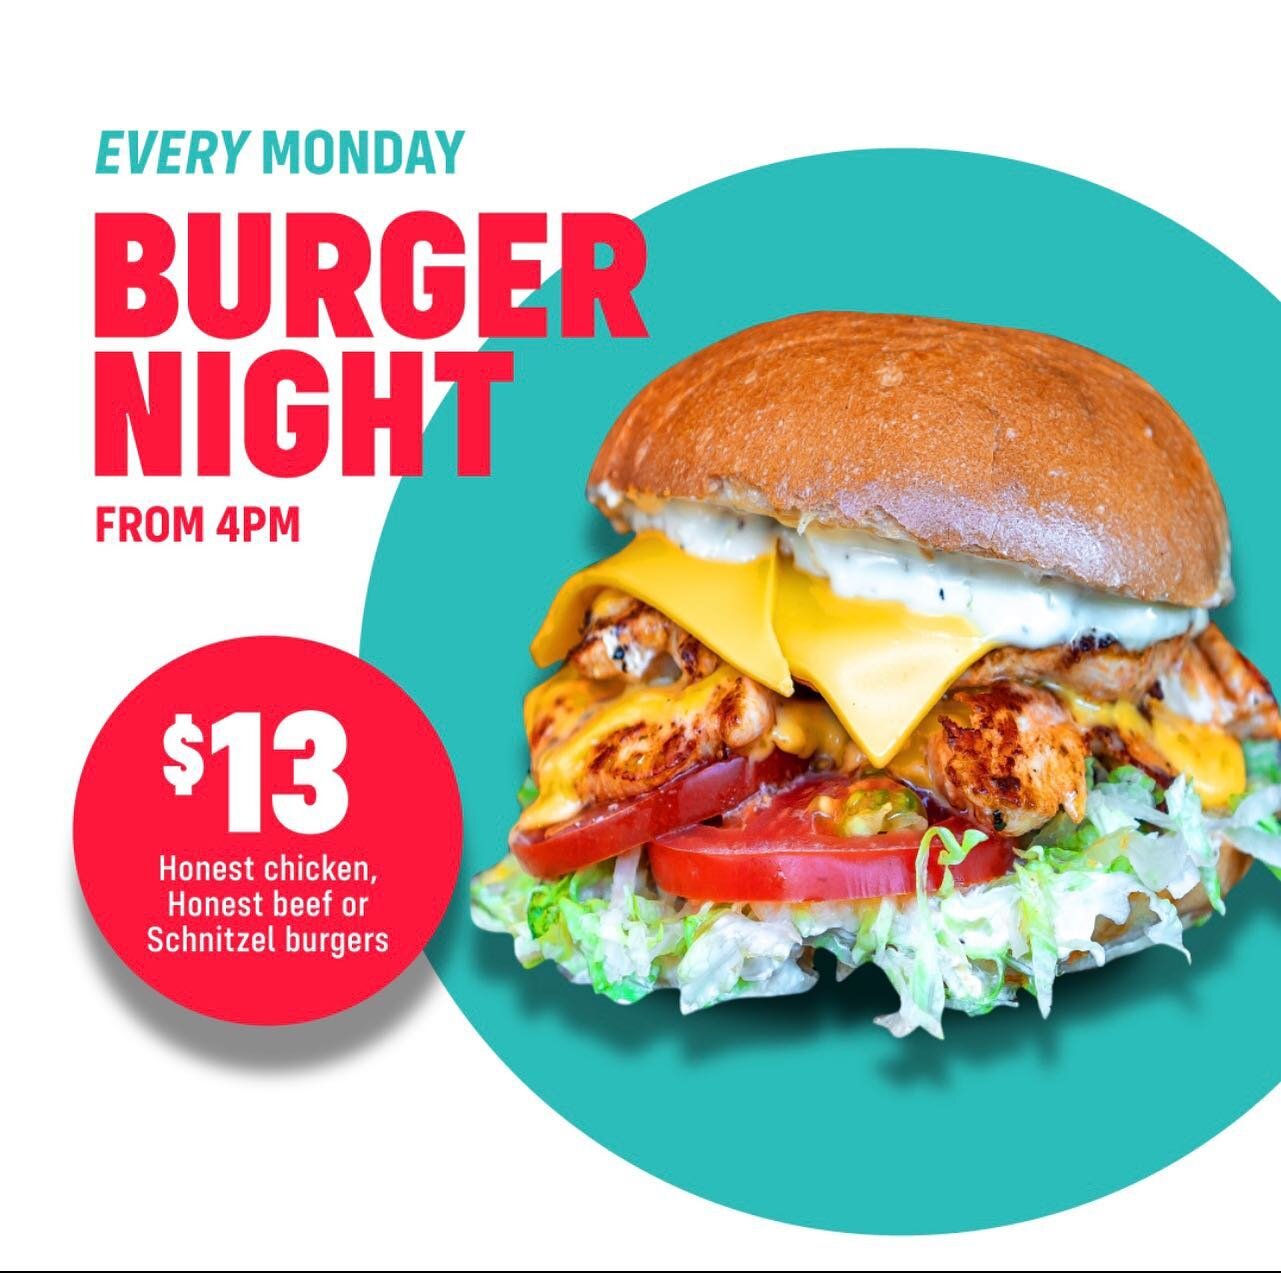 Monday night deal flying into your inbox now! 

$13 Honest Chicken, Honest Beef or Schnitzel burger plus Chips and a can/water tonight from 4pm. 

In store only in Belrose &amp; Newport. 
.
.
.
#burgerdeal #mondayspecial #thehonestchicken #eatlocal #